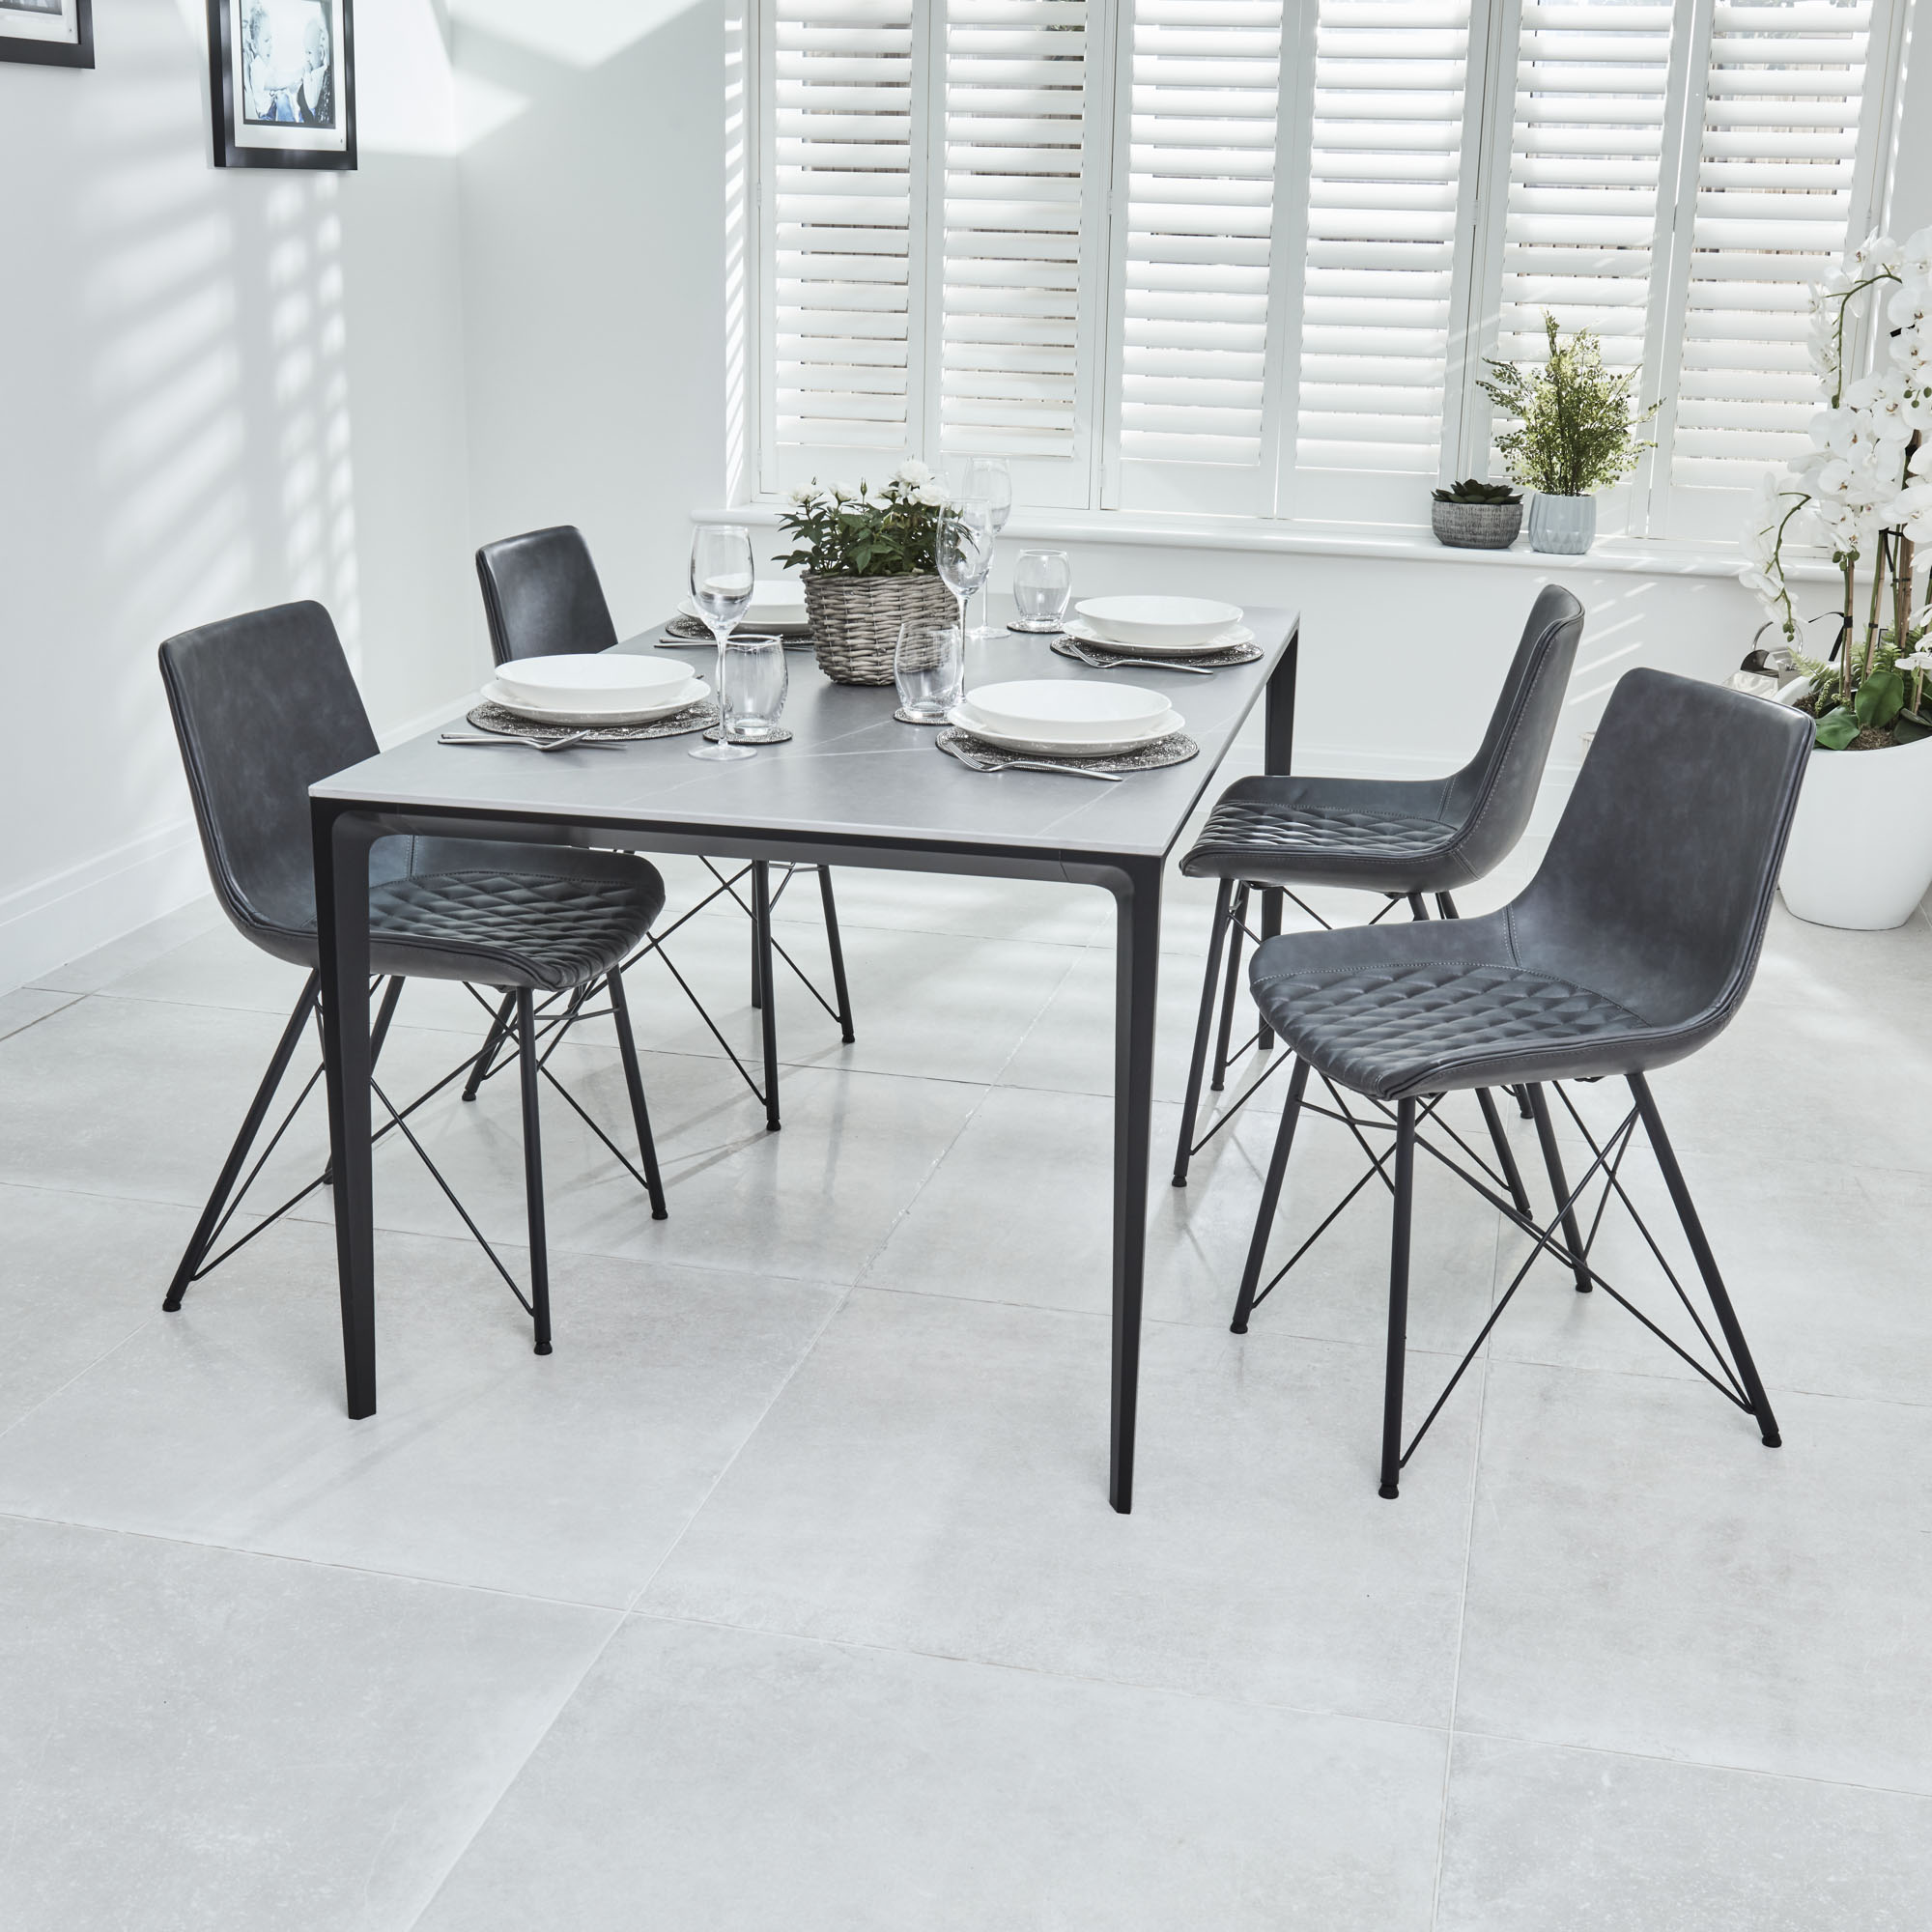 Bellagio 1.6M Grey Sintered Stone Dining Table Set with 4x Leon Grey Dining Chairs